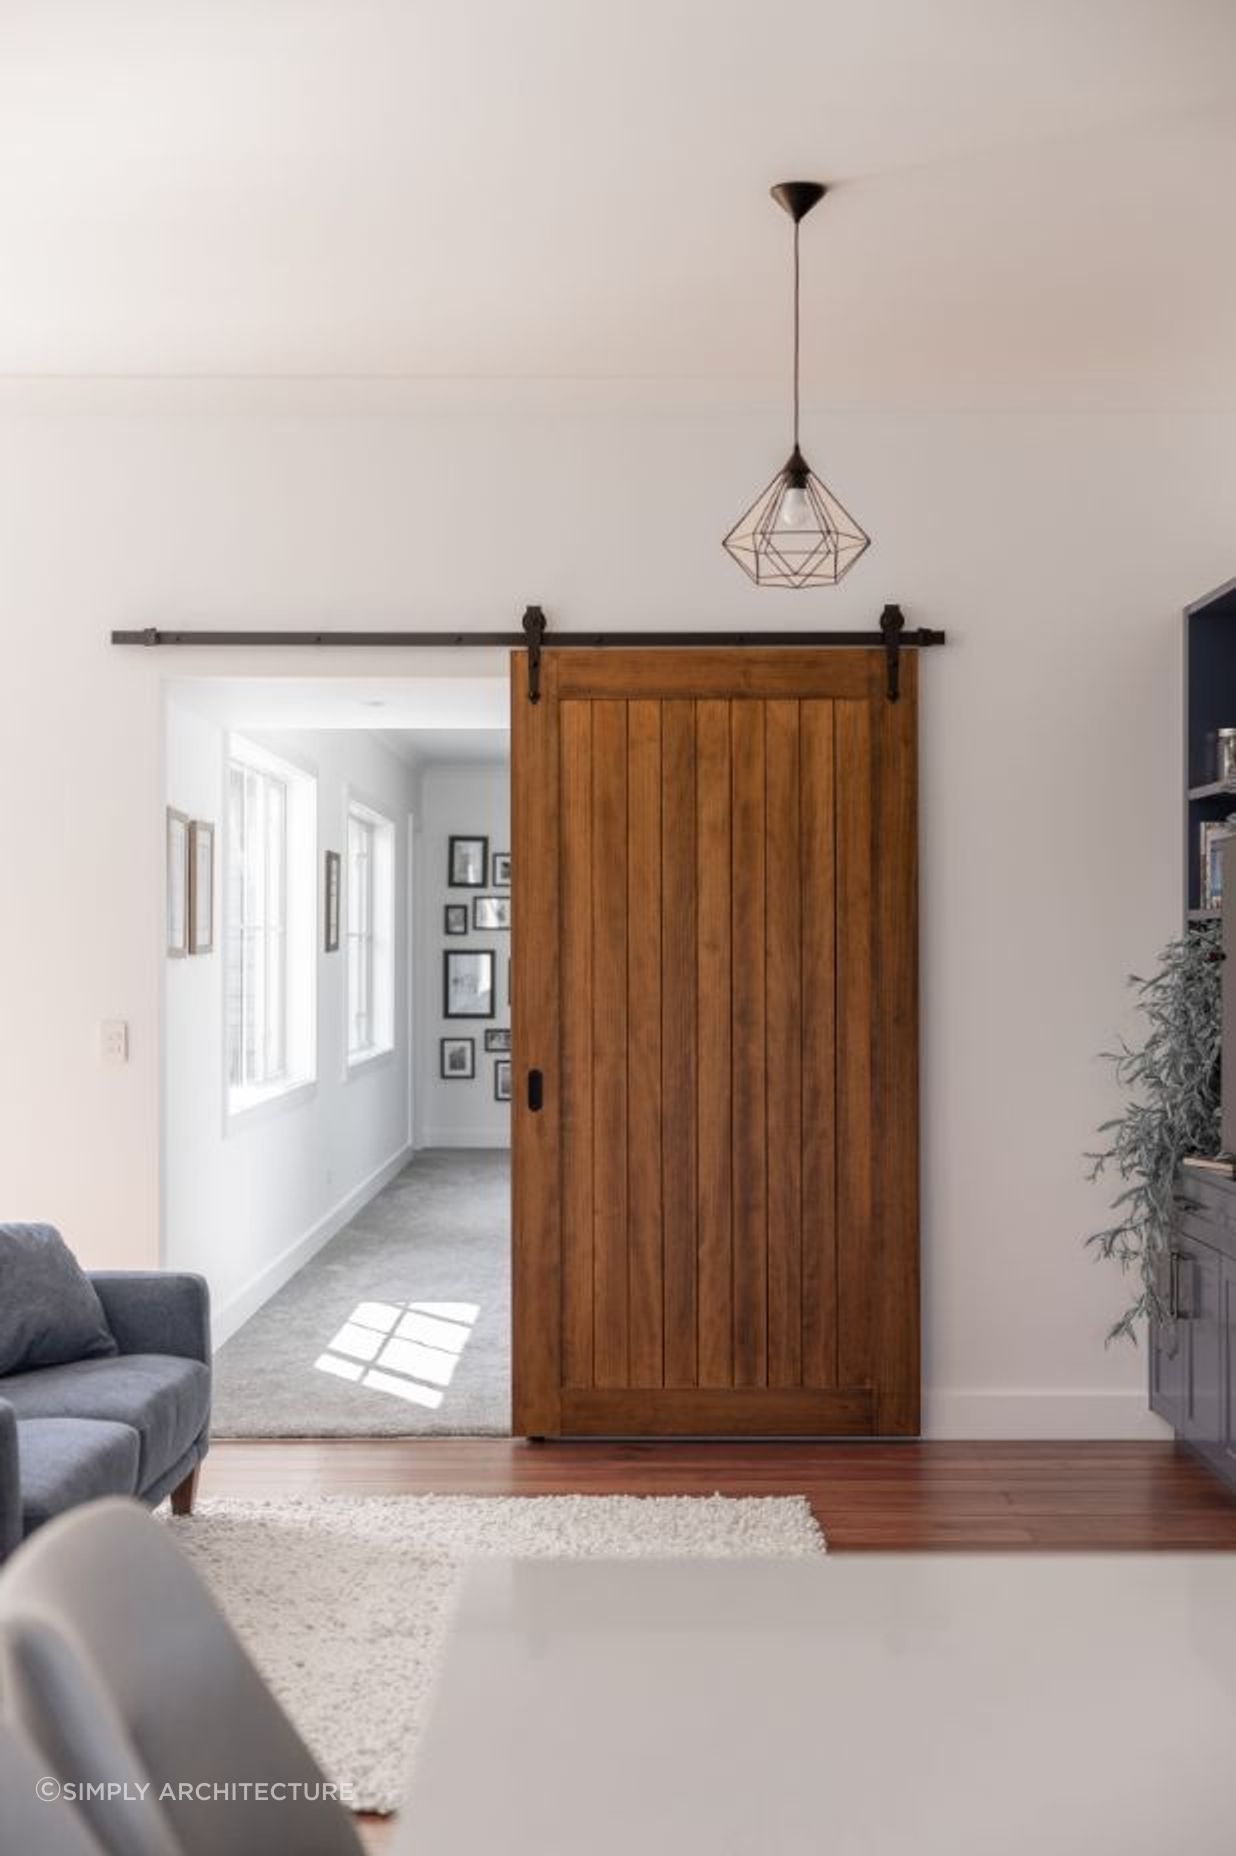 The Barn Door in the Taihape extension furthers the feel of a true country home